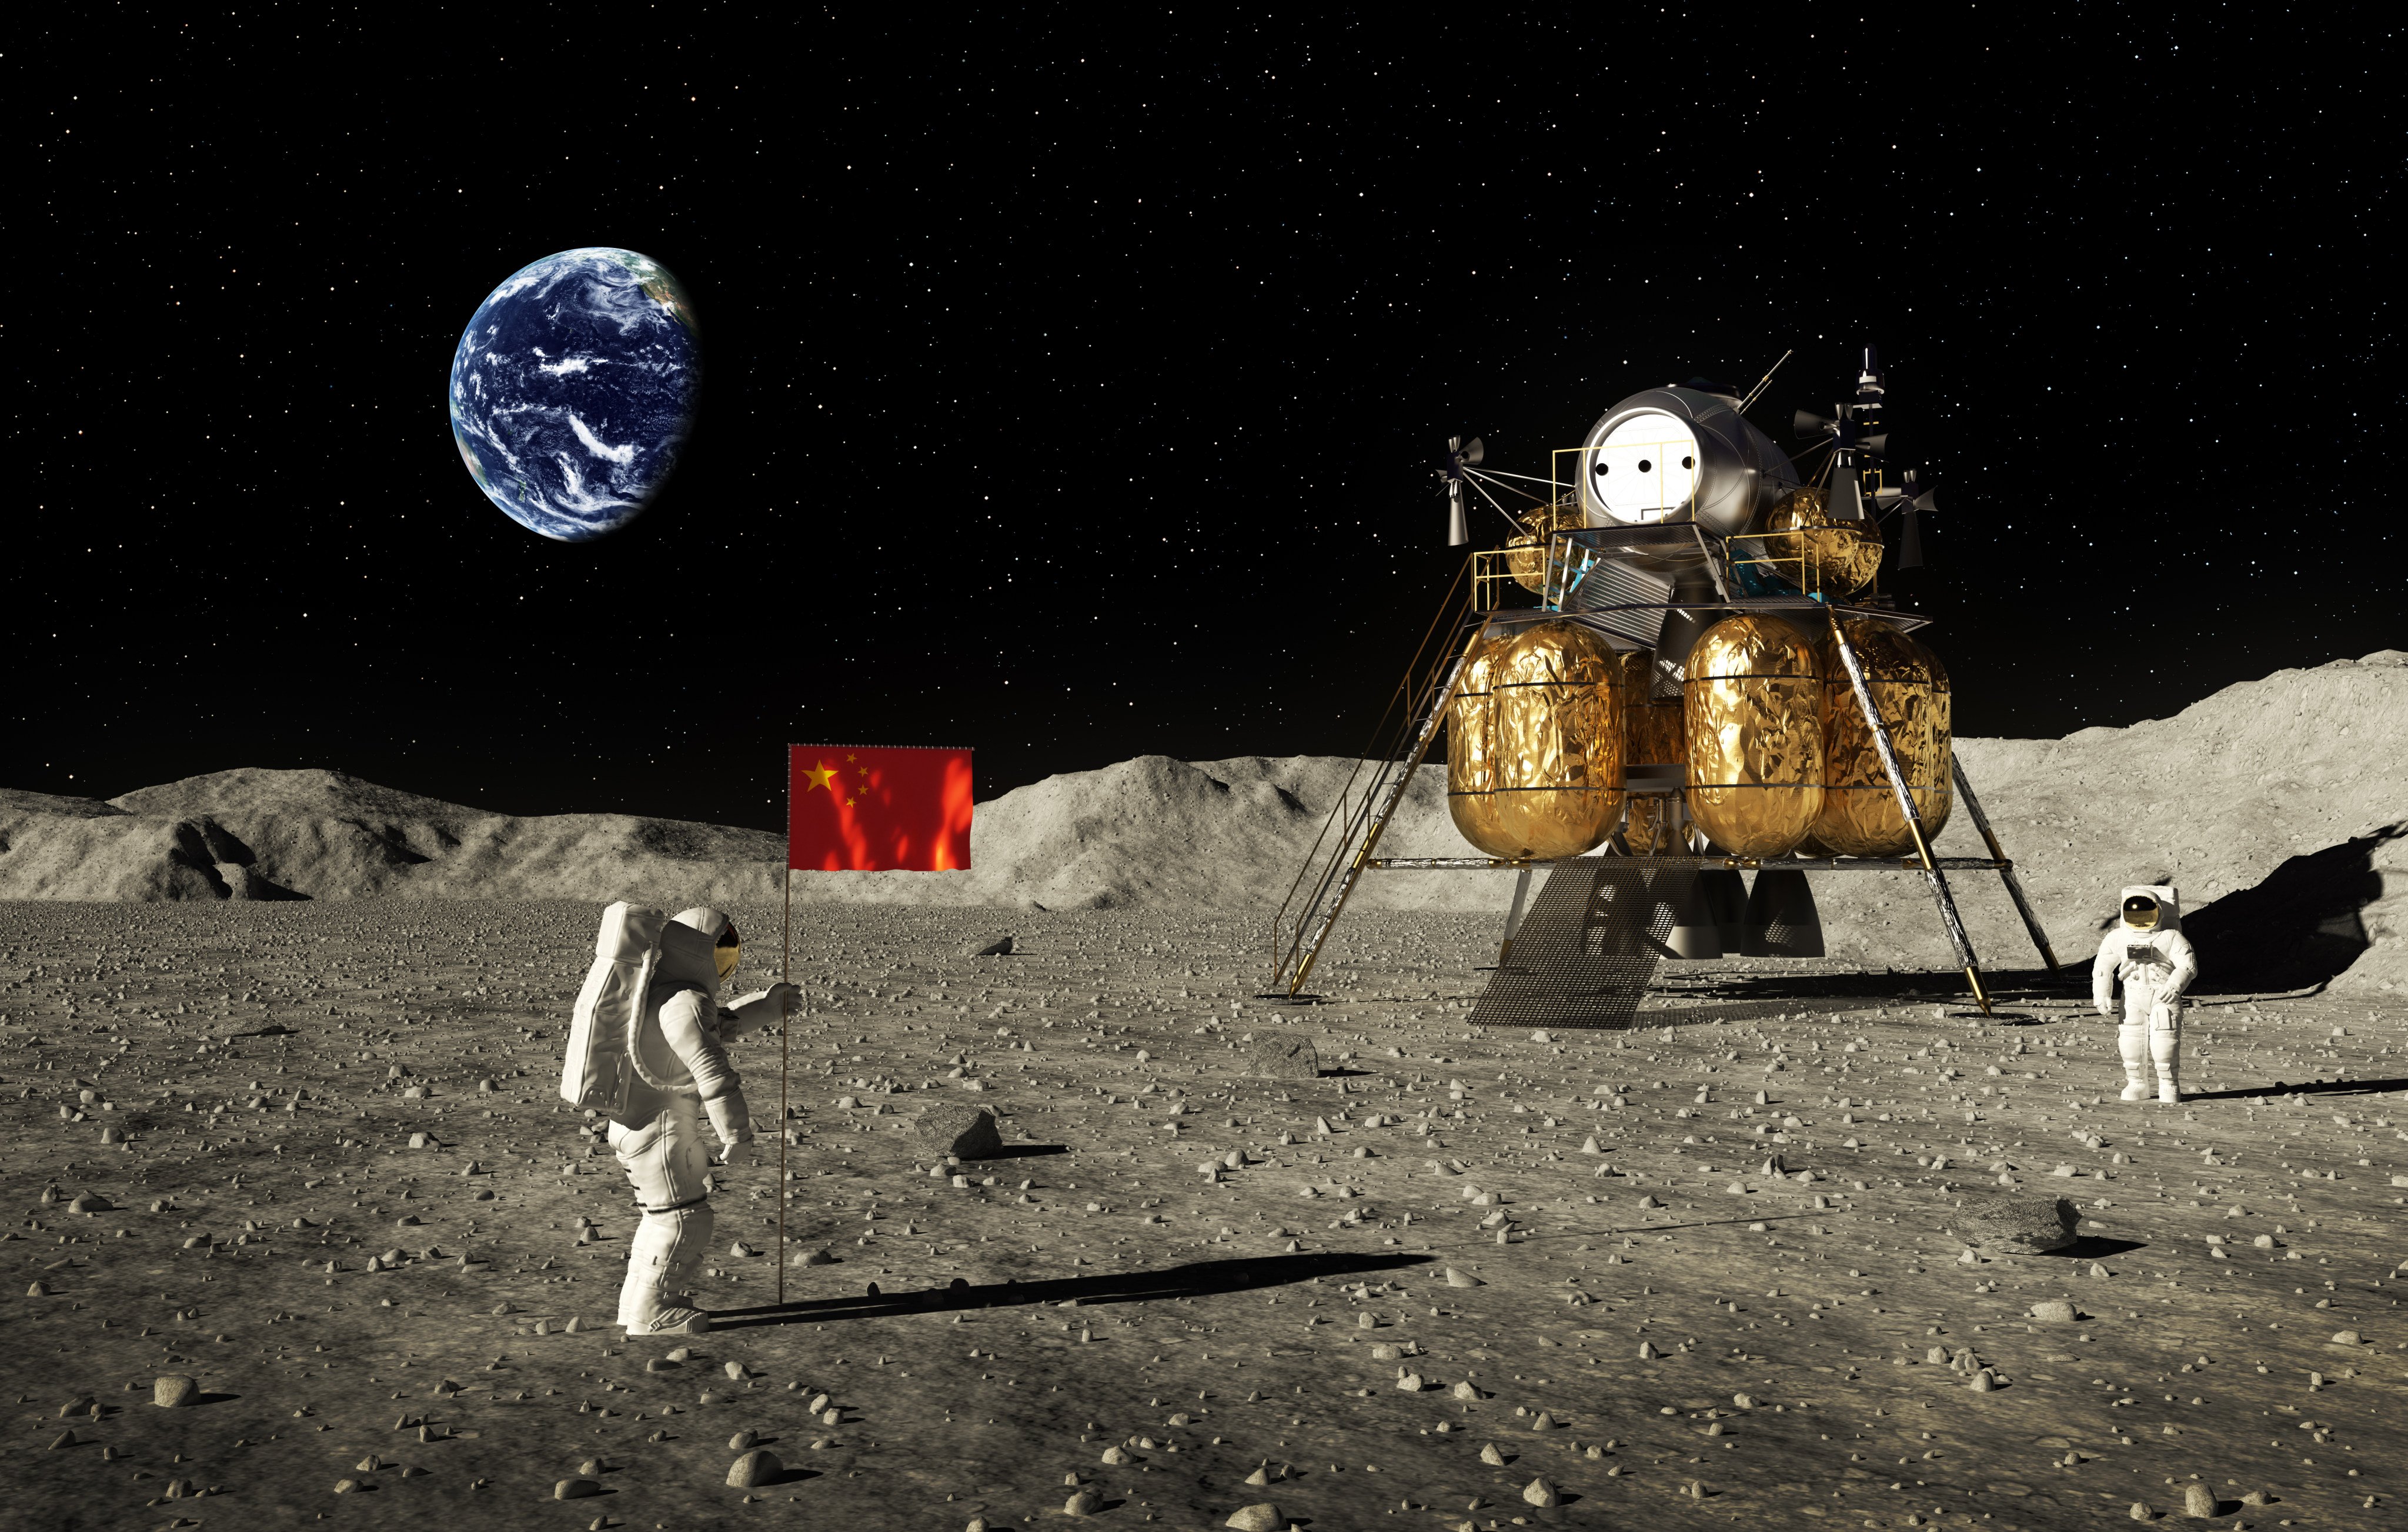 China plans to land a crewed rover on the moon by 2030. Photo: Getty Images